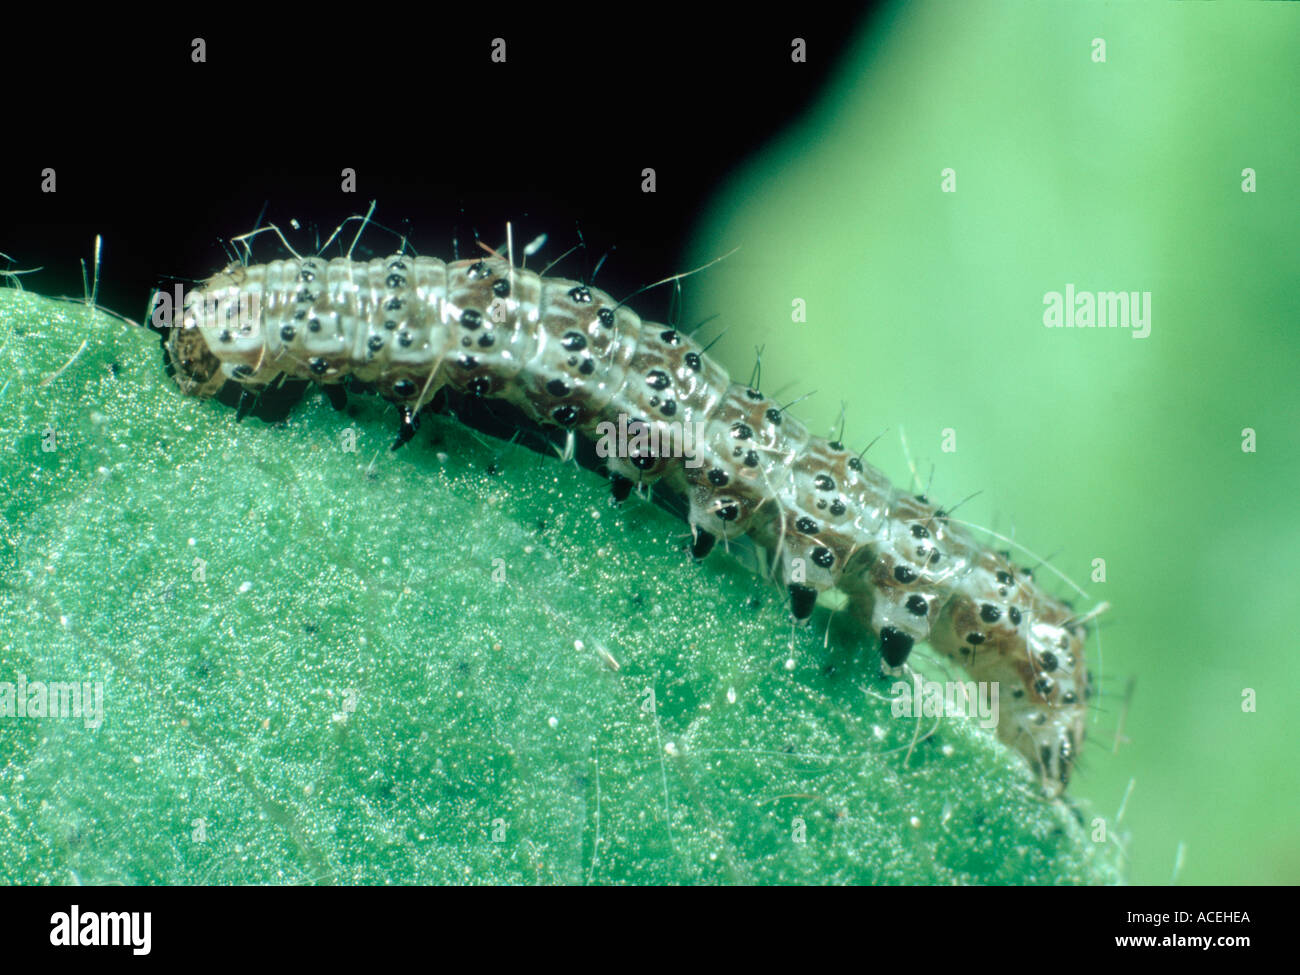 Oldworld or cotton bollworm Helicoverpa armigera young caterpillar on a cotton leaf Stock Photo